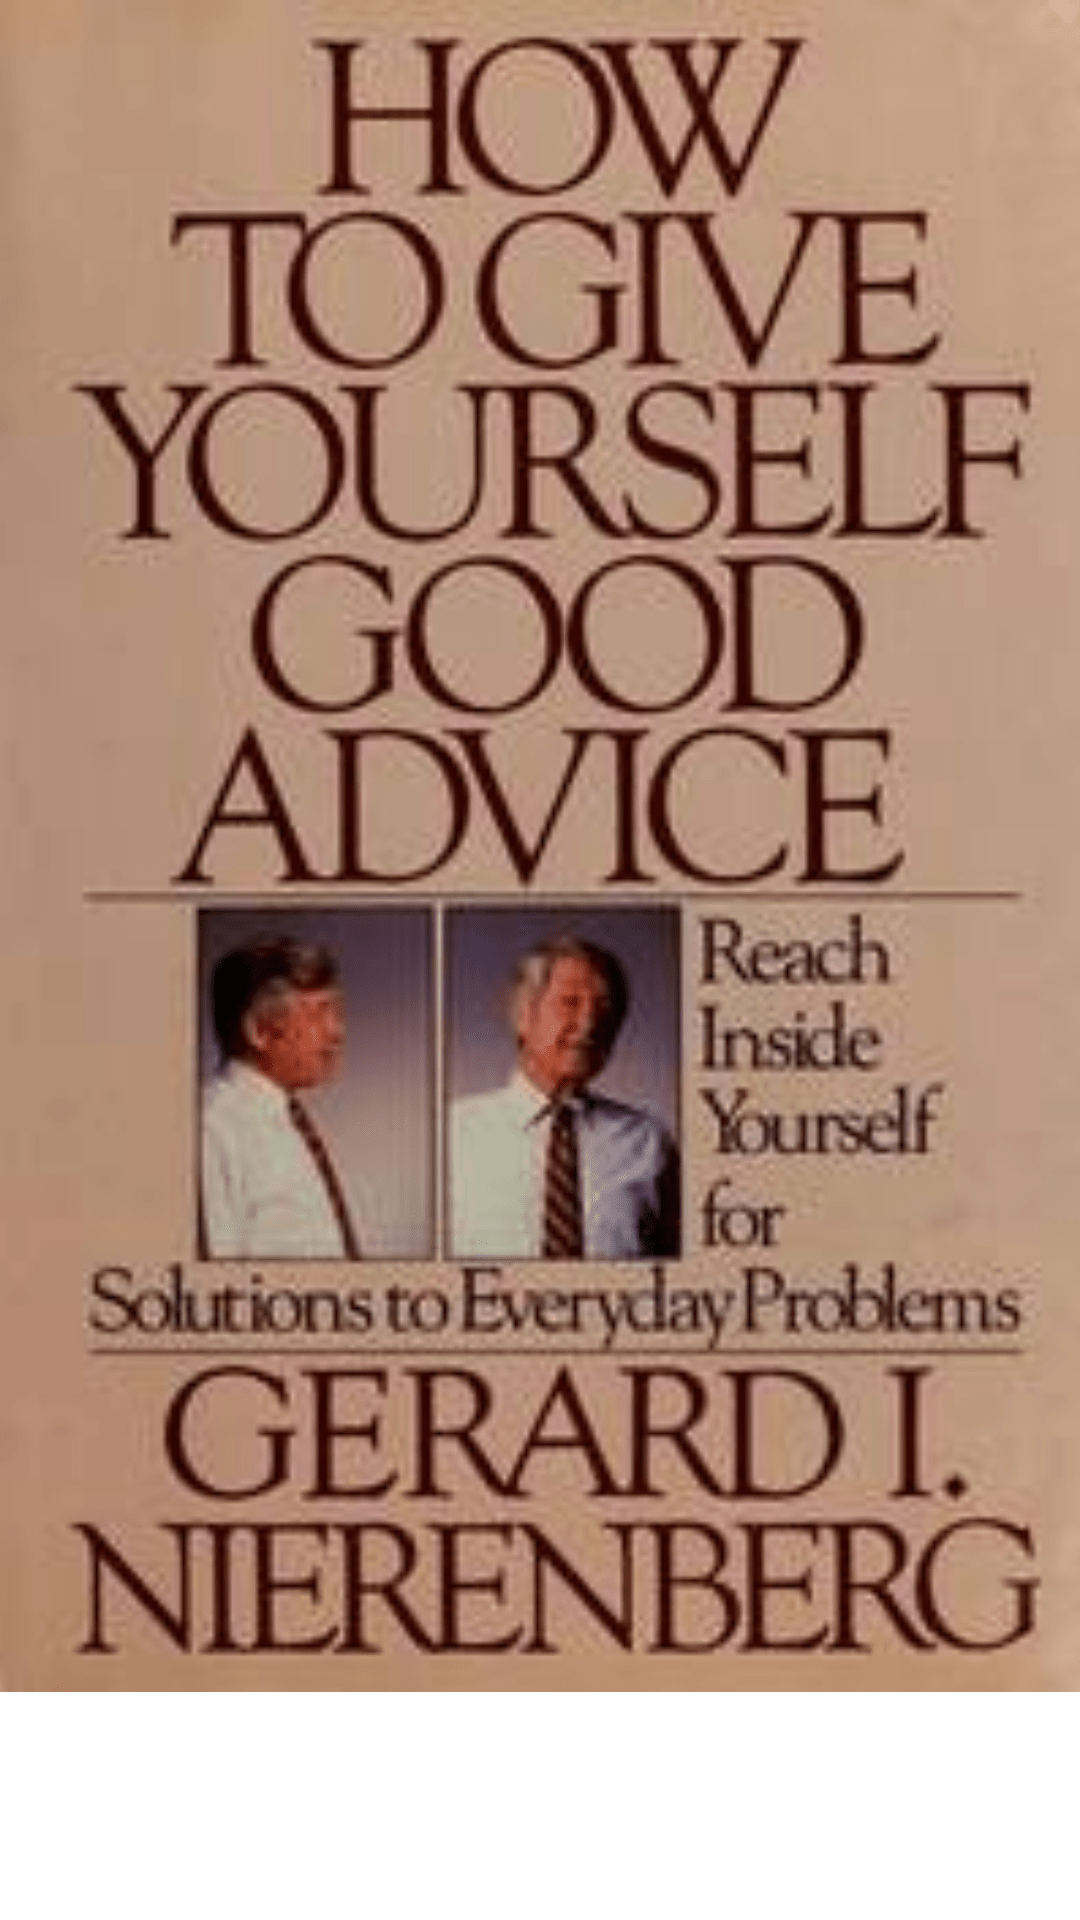 How to Give Yourself Good Advice